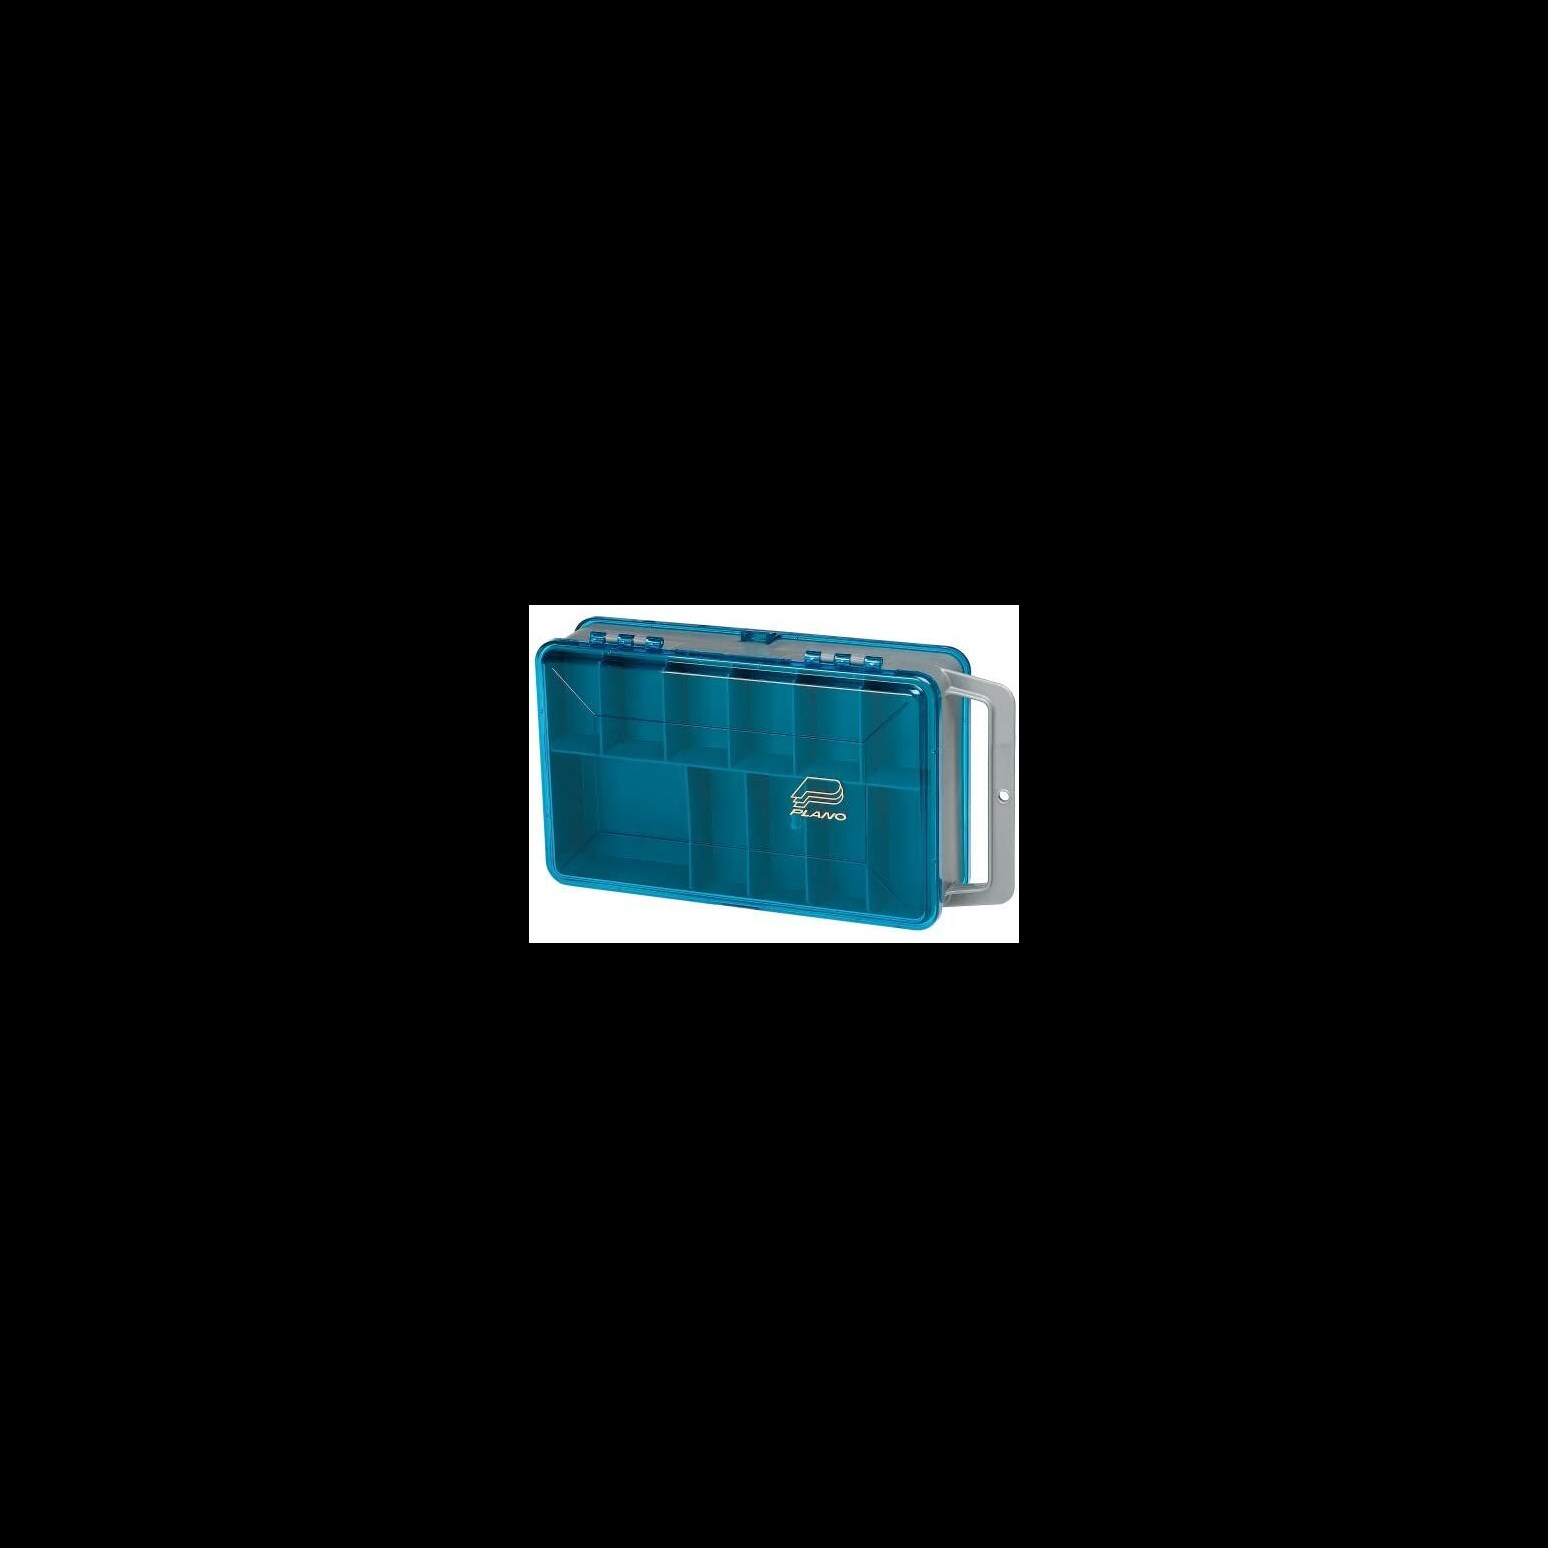 Double Sided Tackle Box Organizer in Blue, Medium - Fishing